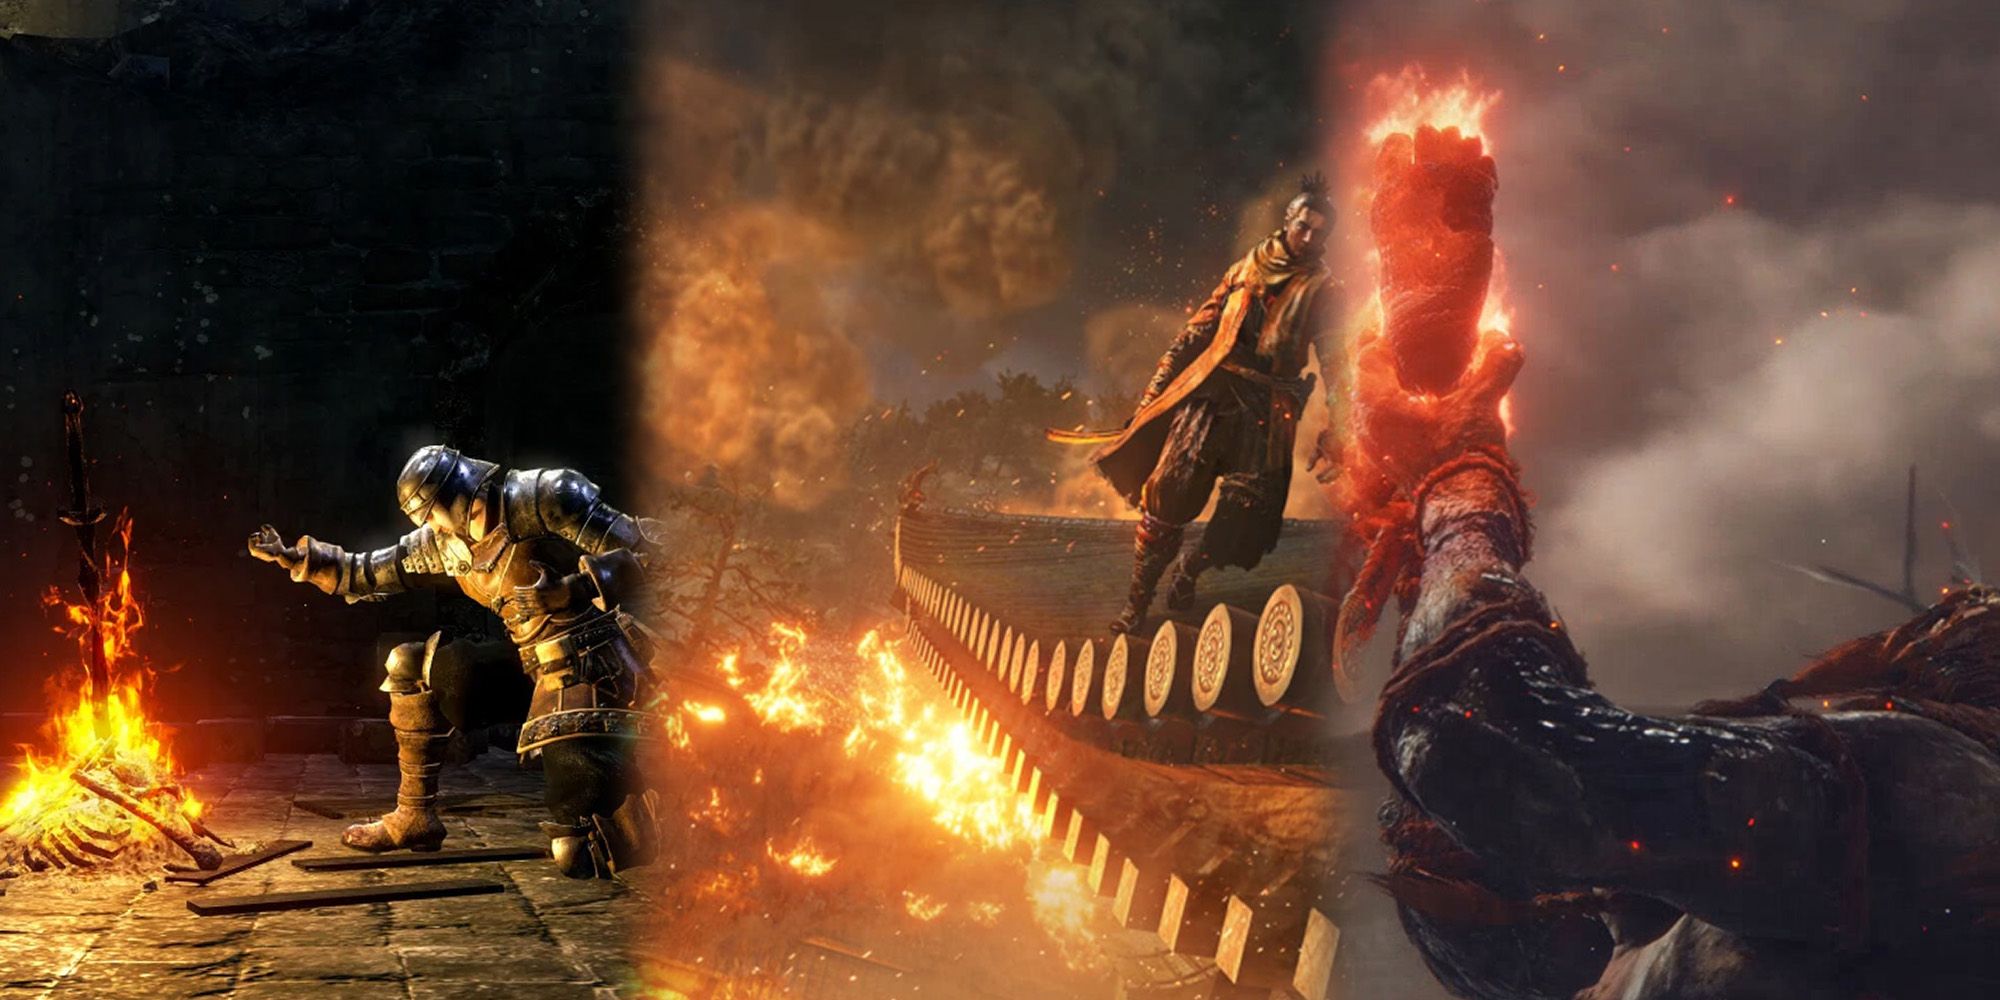 Elden Ring - Three Side By Side Images Of Linking the Flame in DS1, Ashina Burning in Sekiro, Fire Giant Burning Own Leg in Elden Ring